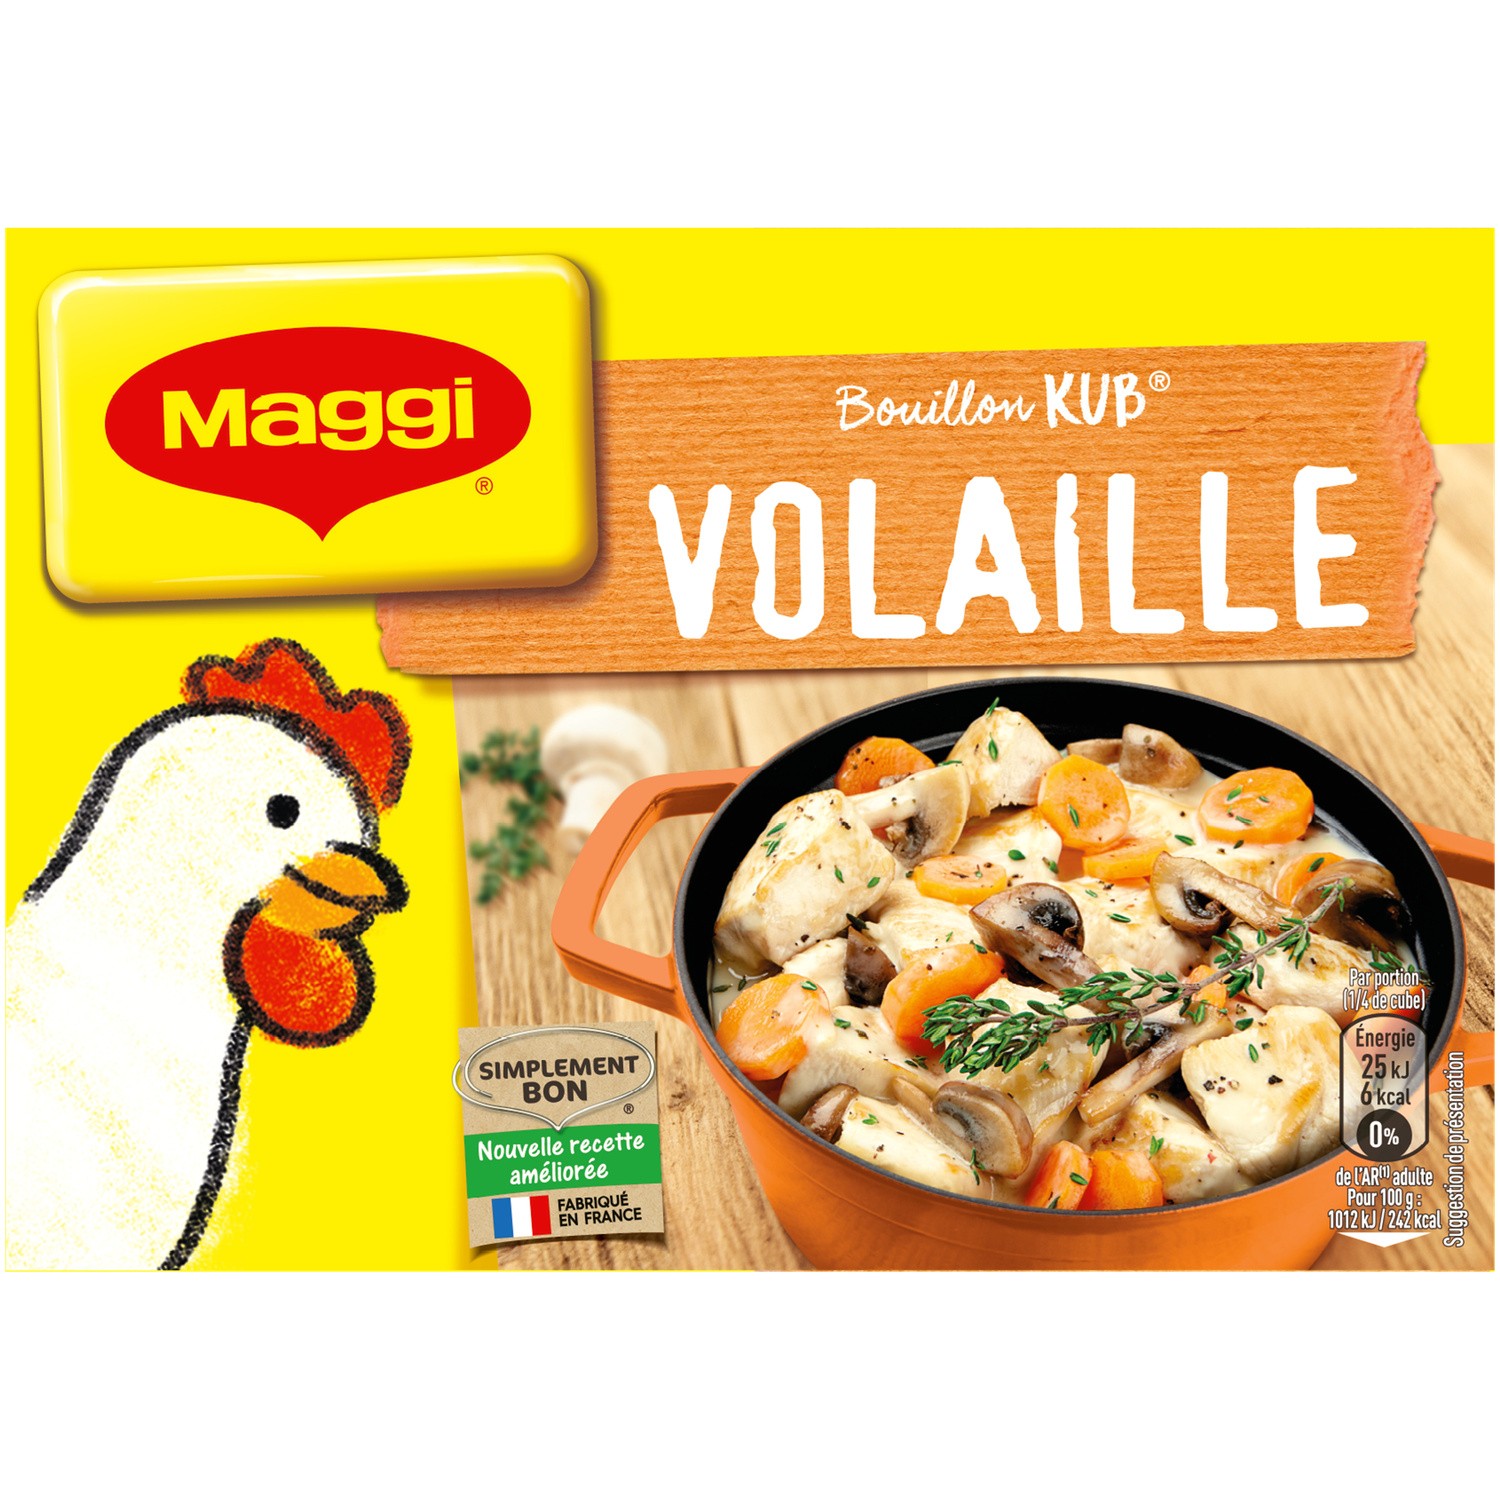 18 Bouillons KUB Volaille